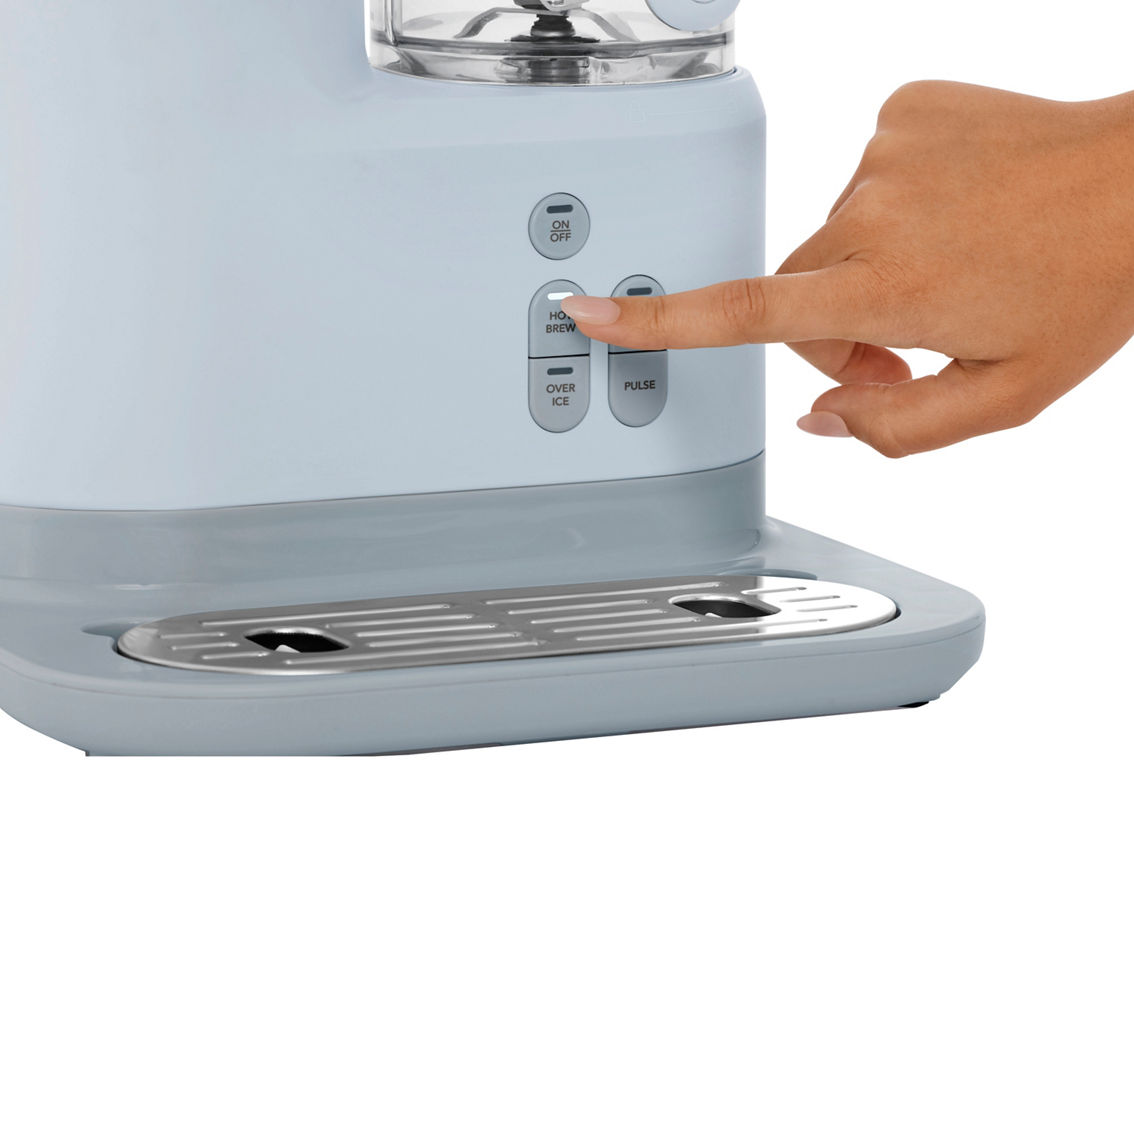 Mr. Coffee Frappe Hot and Cold Single Serve Coffee Maker - Image 7 of 7